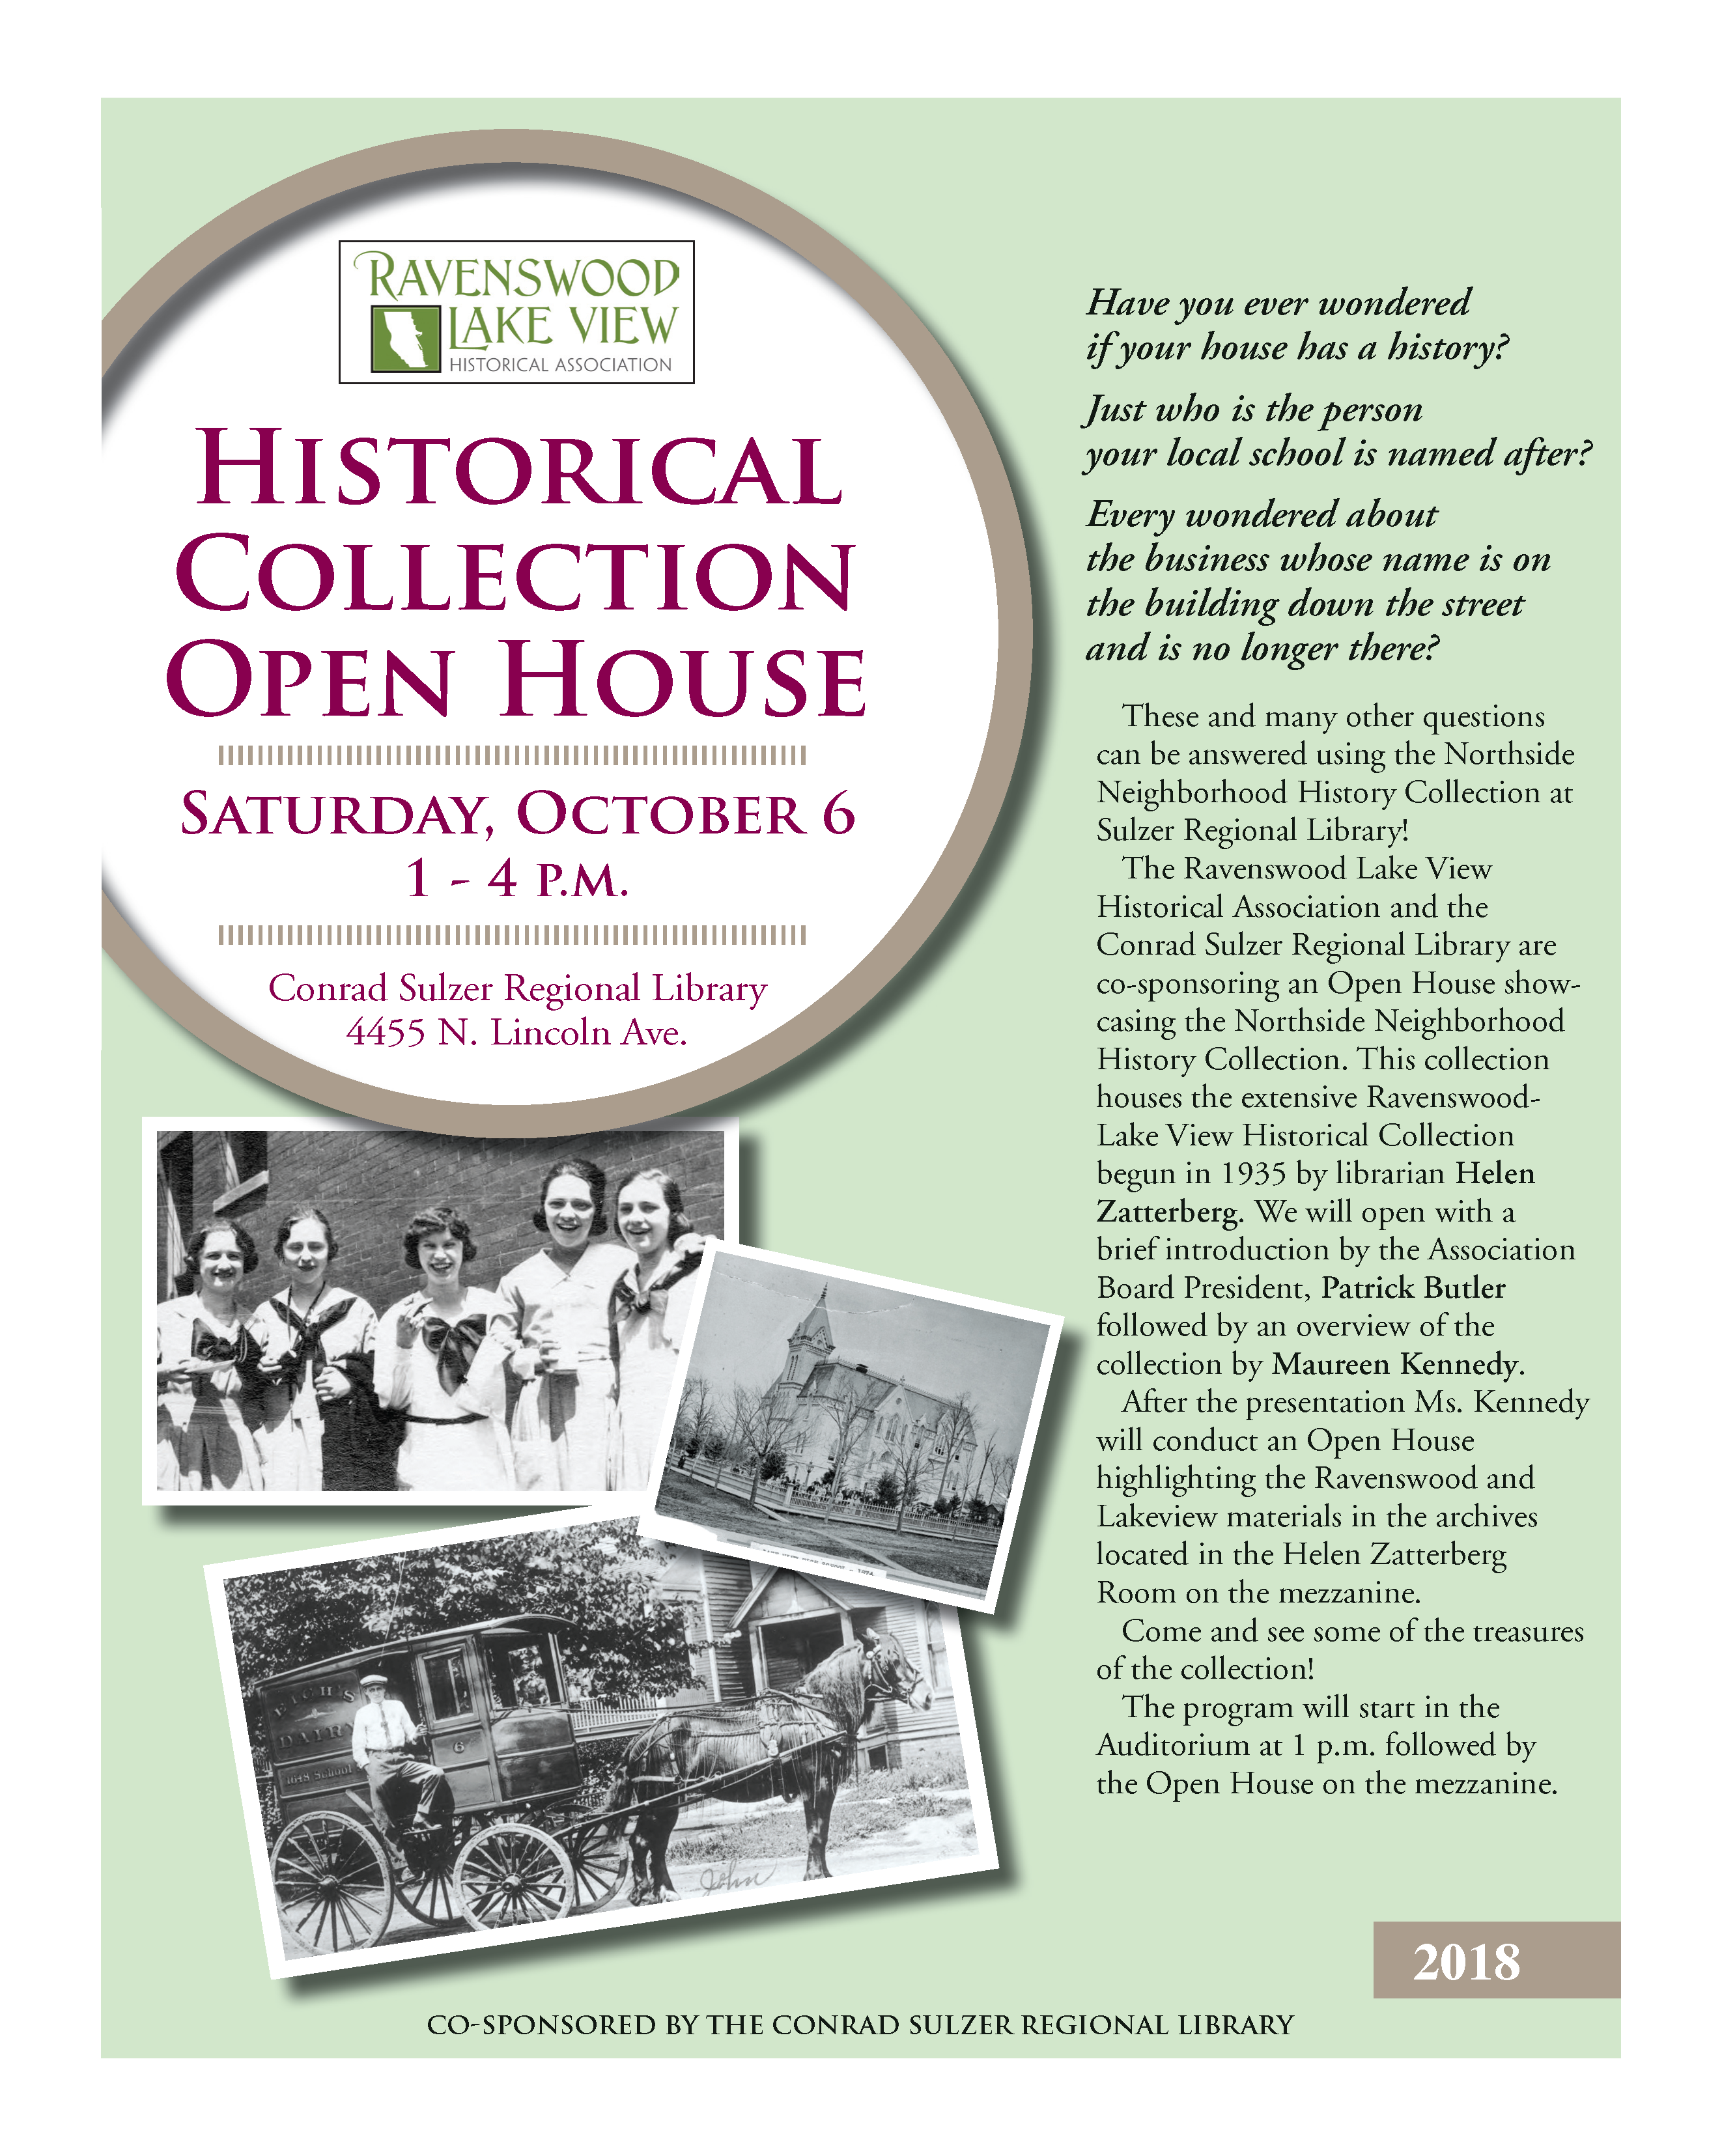 Historical Collection Open House - October 6, 1-4pm - Conrad Sulzer Regional Library, 4455 N. Lincoln Ave.